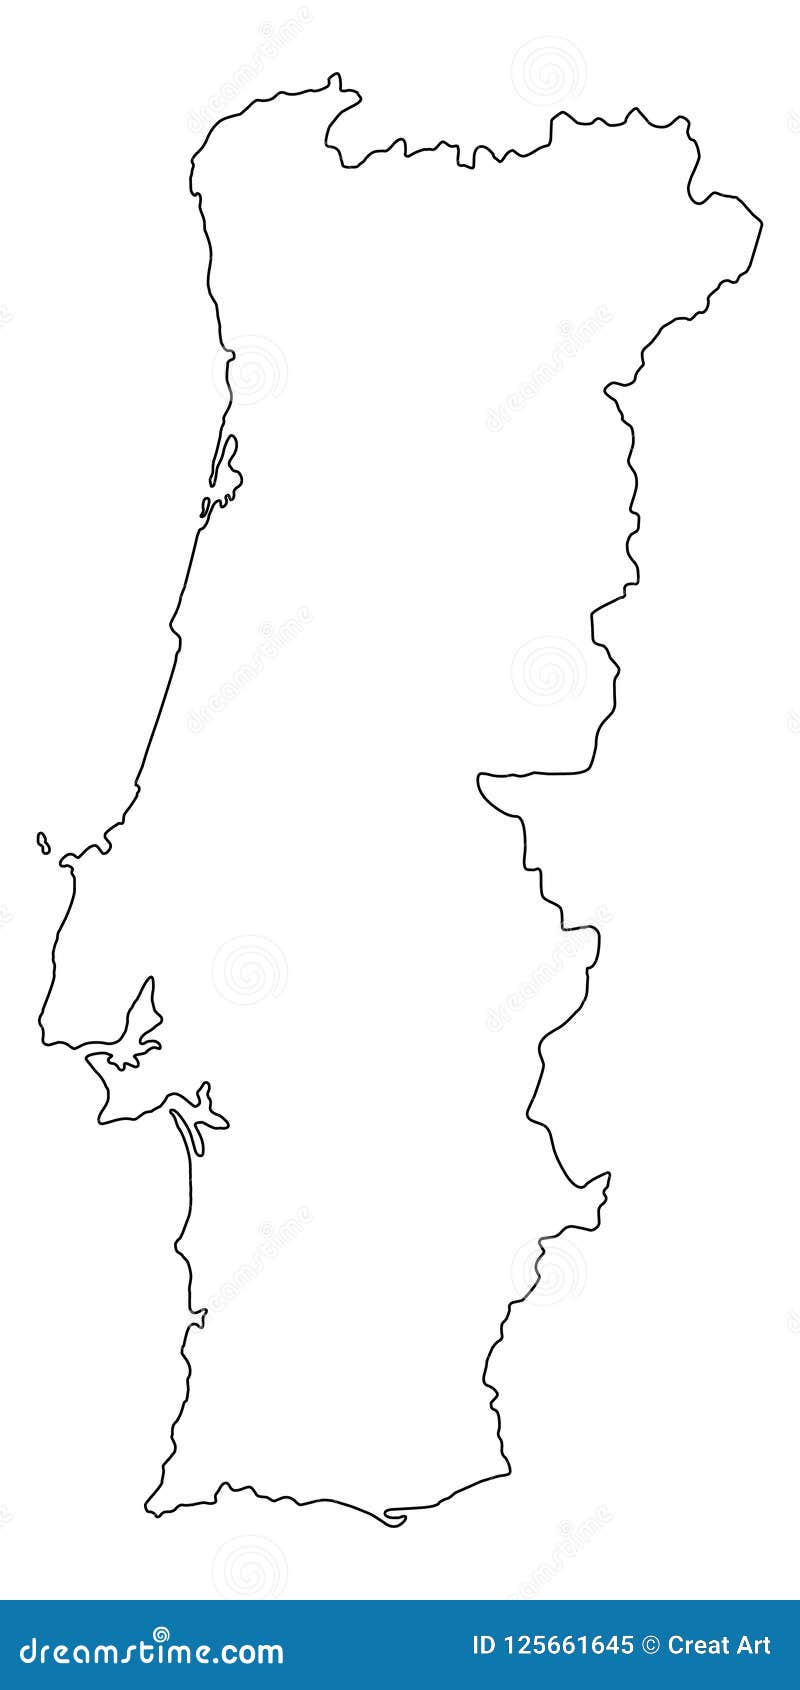 Portugal Outline - Portugal Map Outline Graphic Freehand Drawing Stock